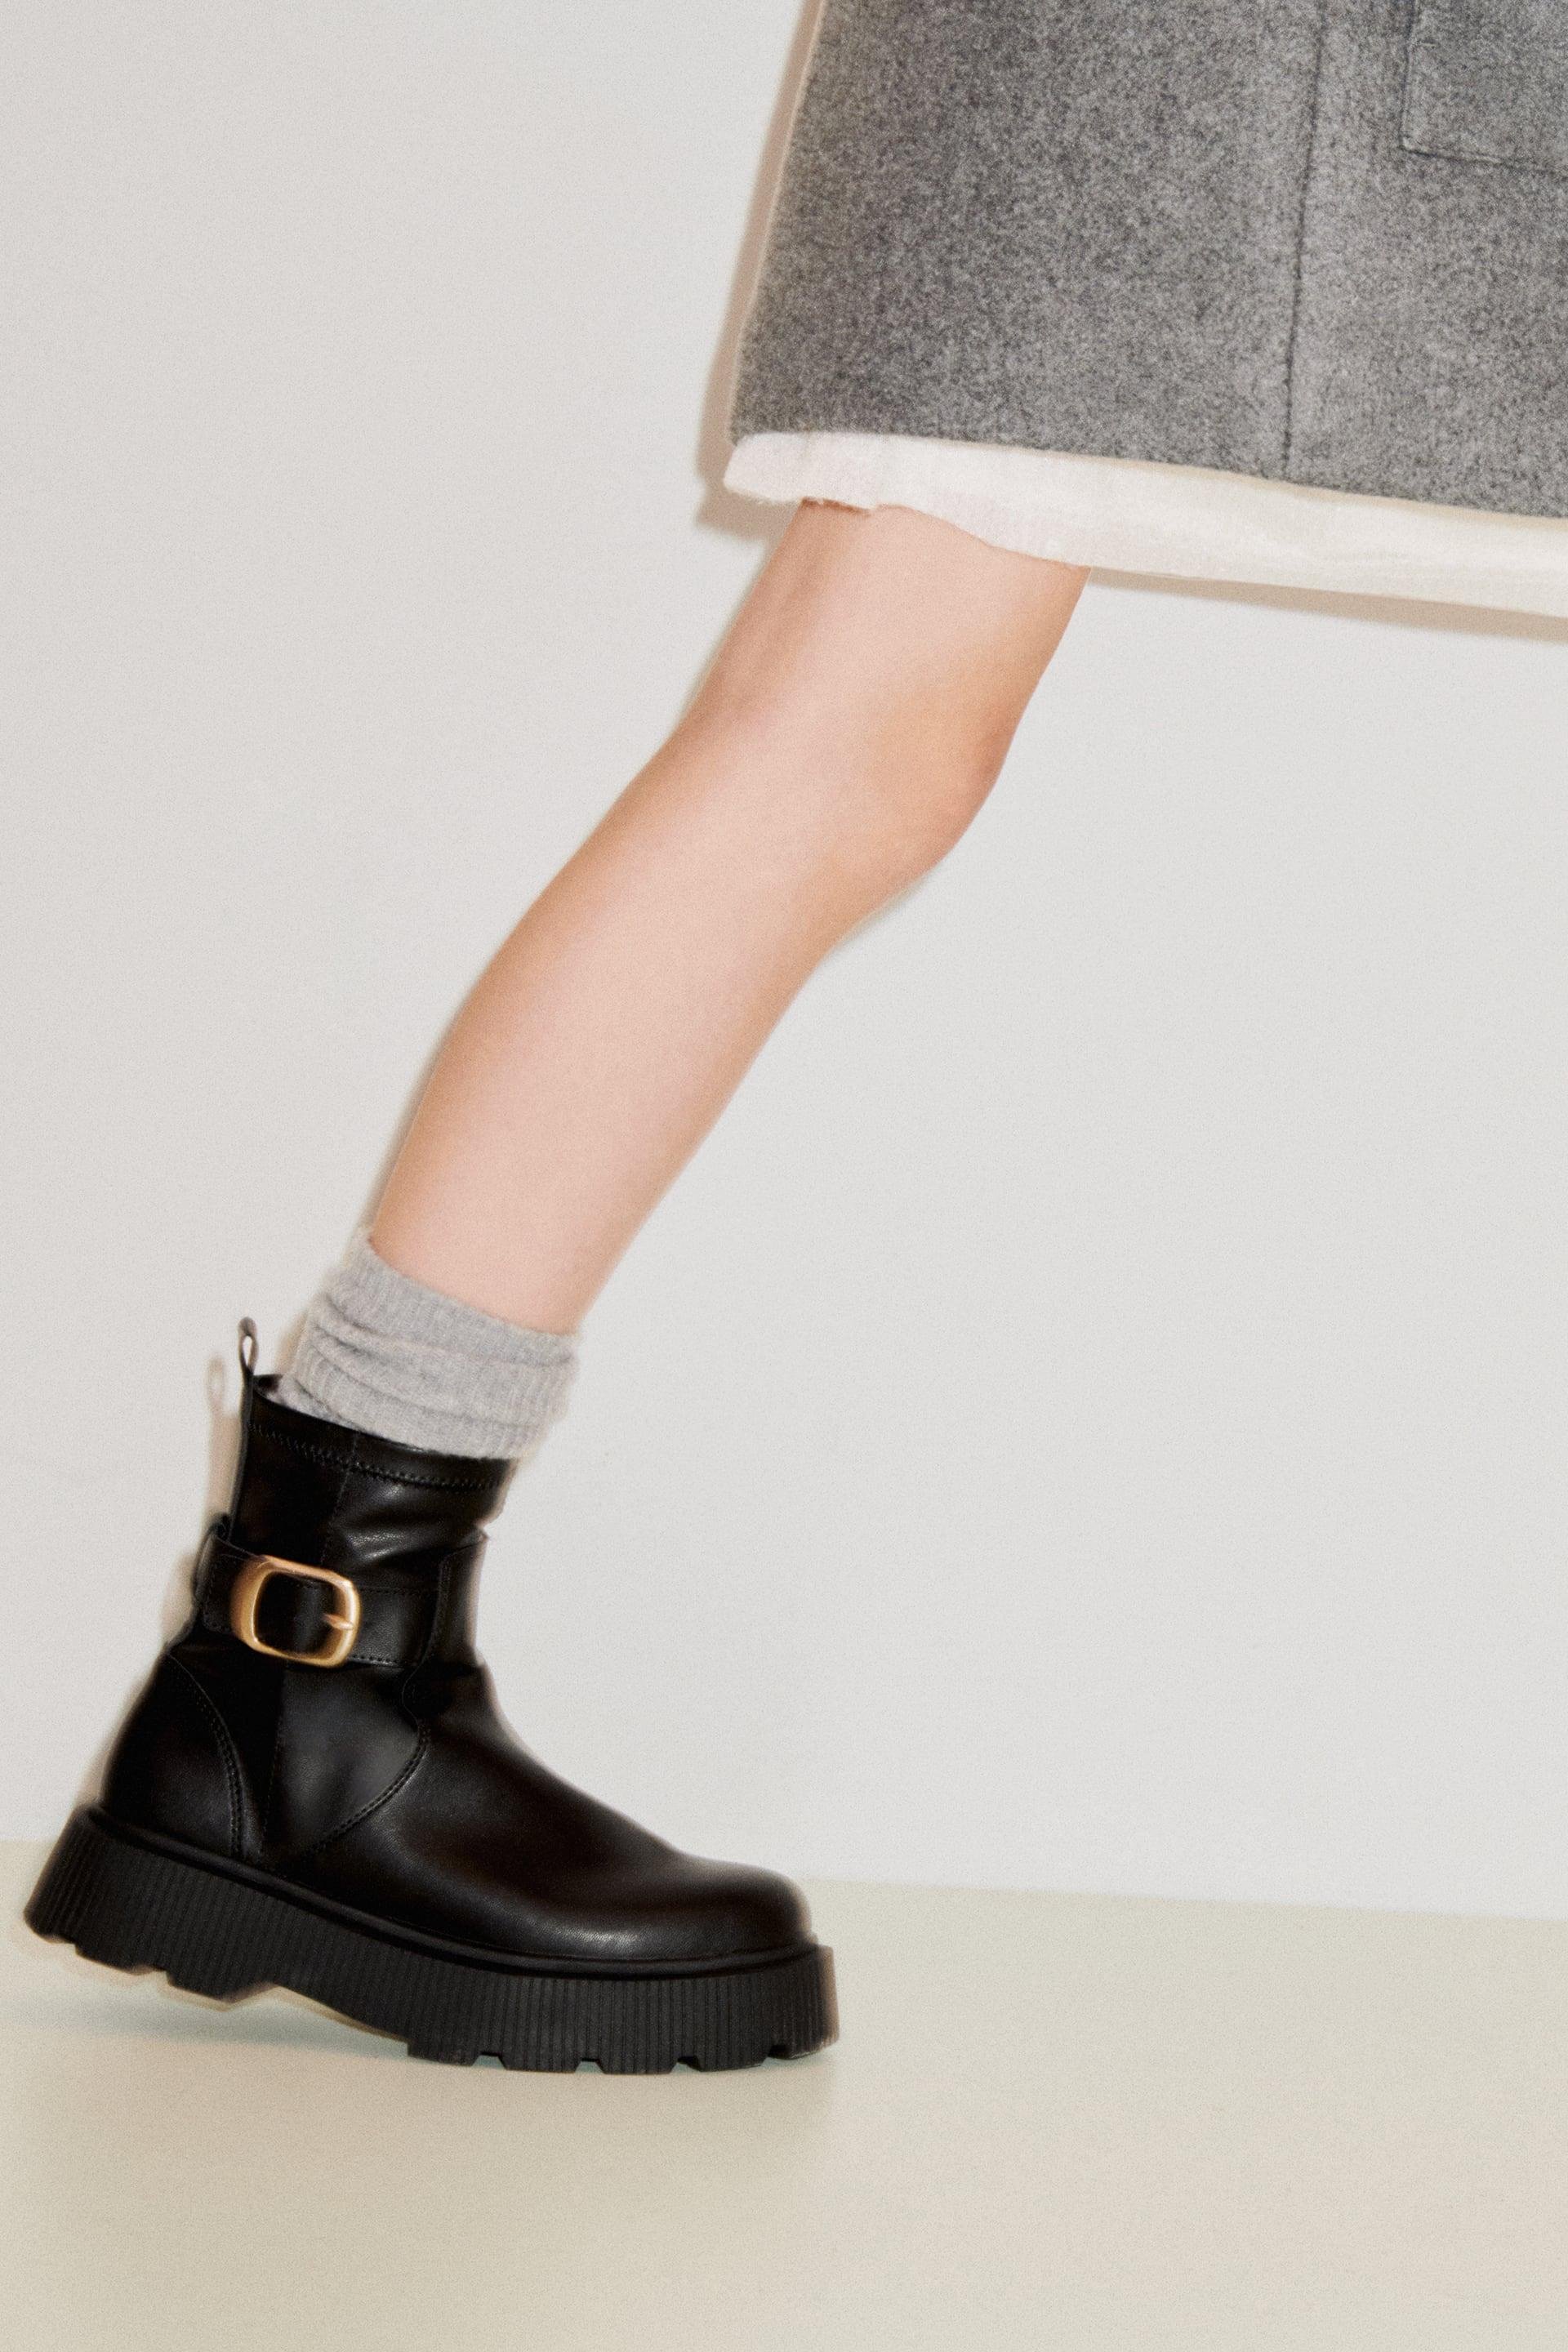 BUCKLED ANKLE BOOT by ZARA